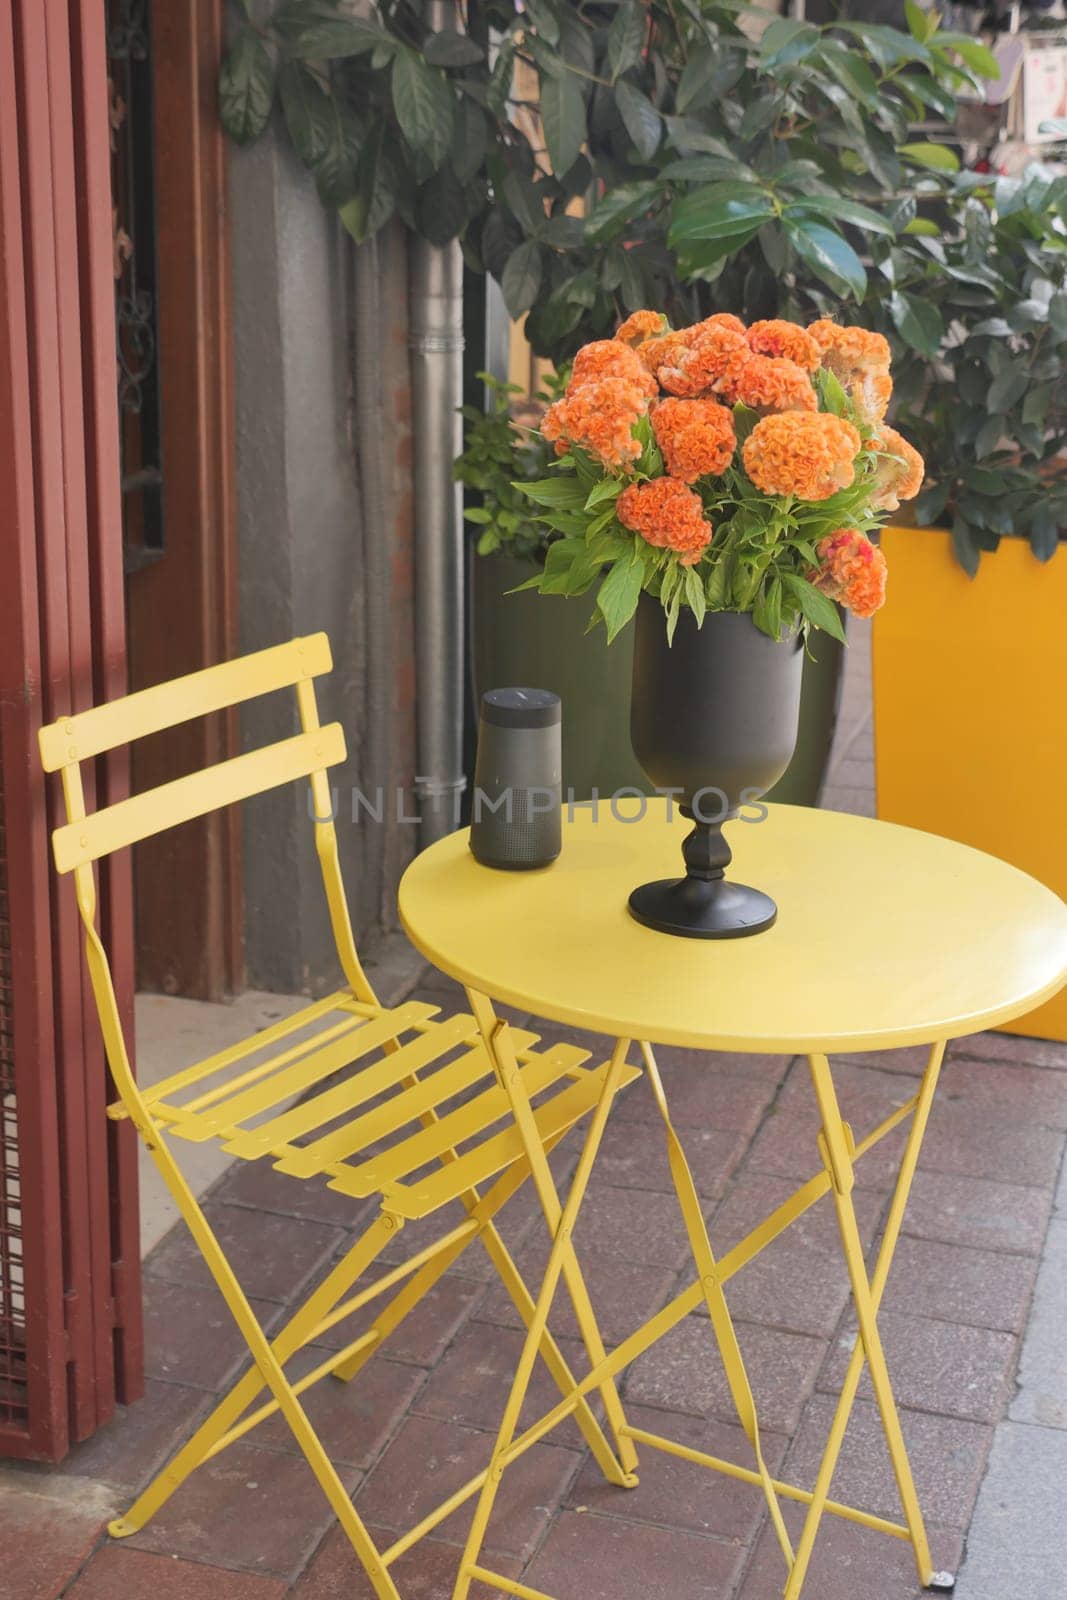 A yellow table adorned with a vase of flowers as decoration,